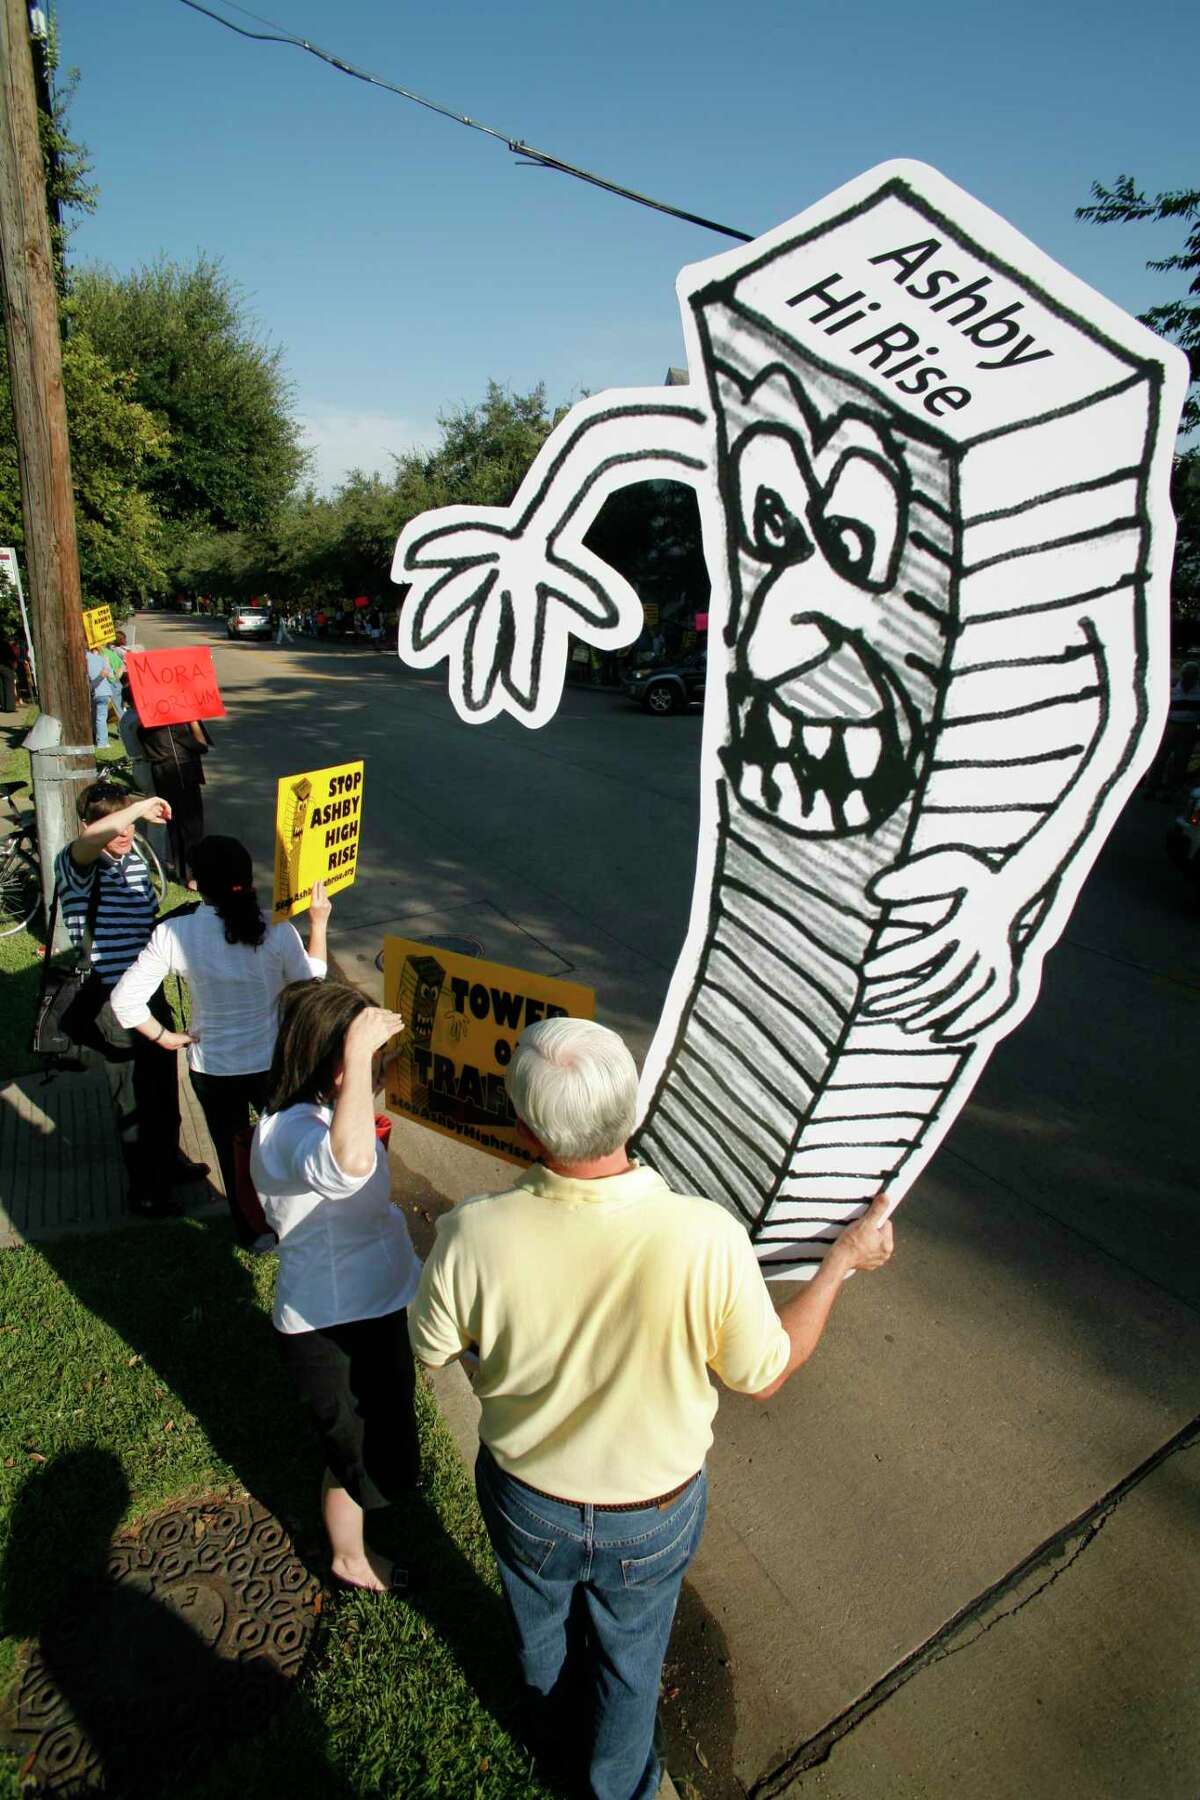 On Oct. 3, 2007, noisy protesters took their message to the street Wednesday, specifically the 1700 block of Bissonnet at Ashby, where a proposed 23-story high-rise development has angered area residents.